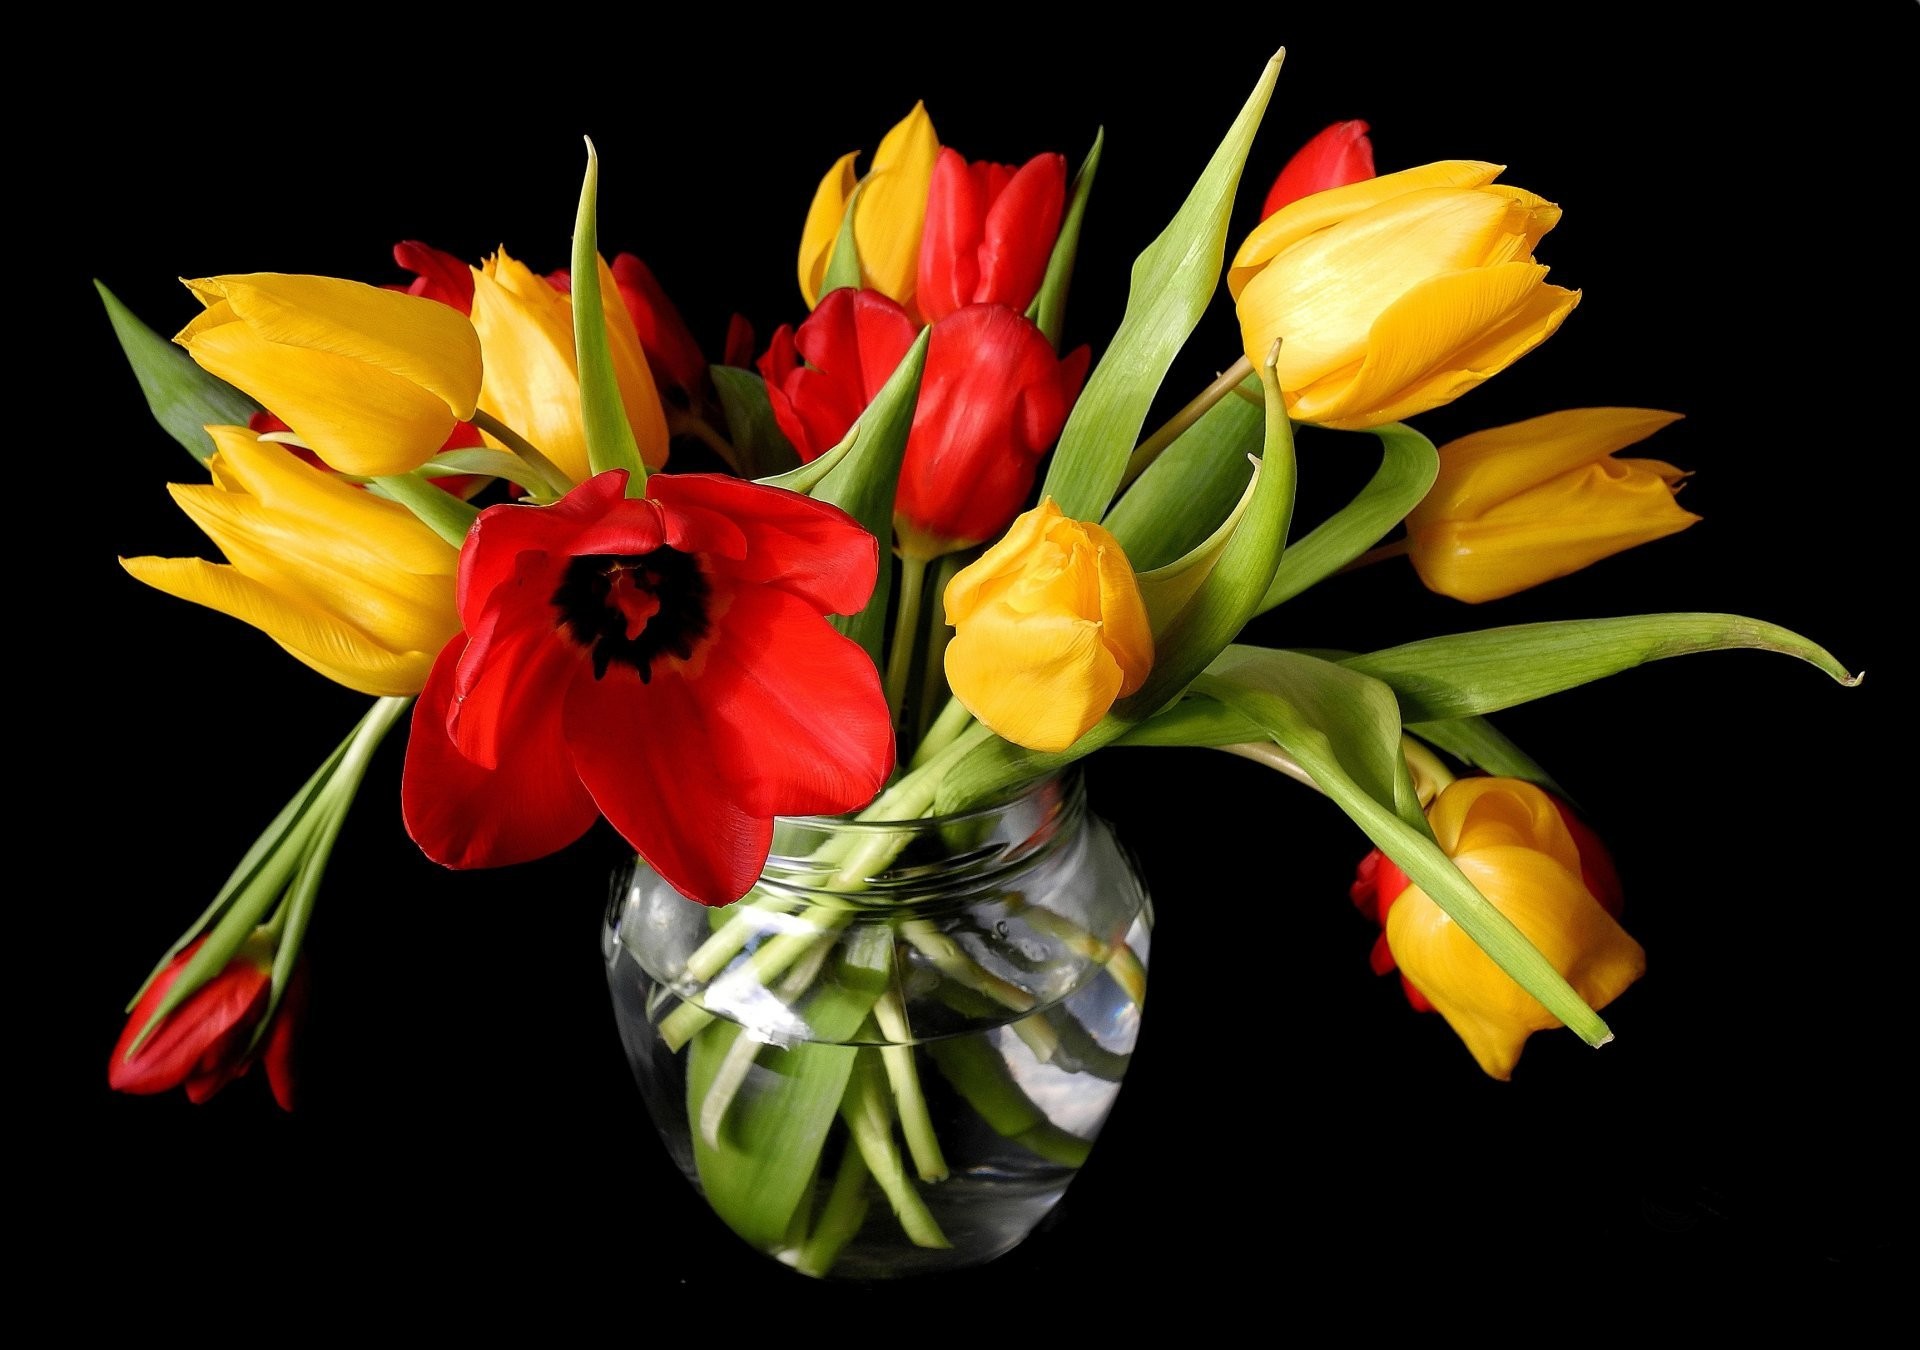 1920x1350 spring tulips yellow red vase flower buds black background